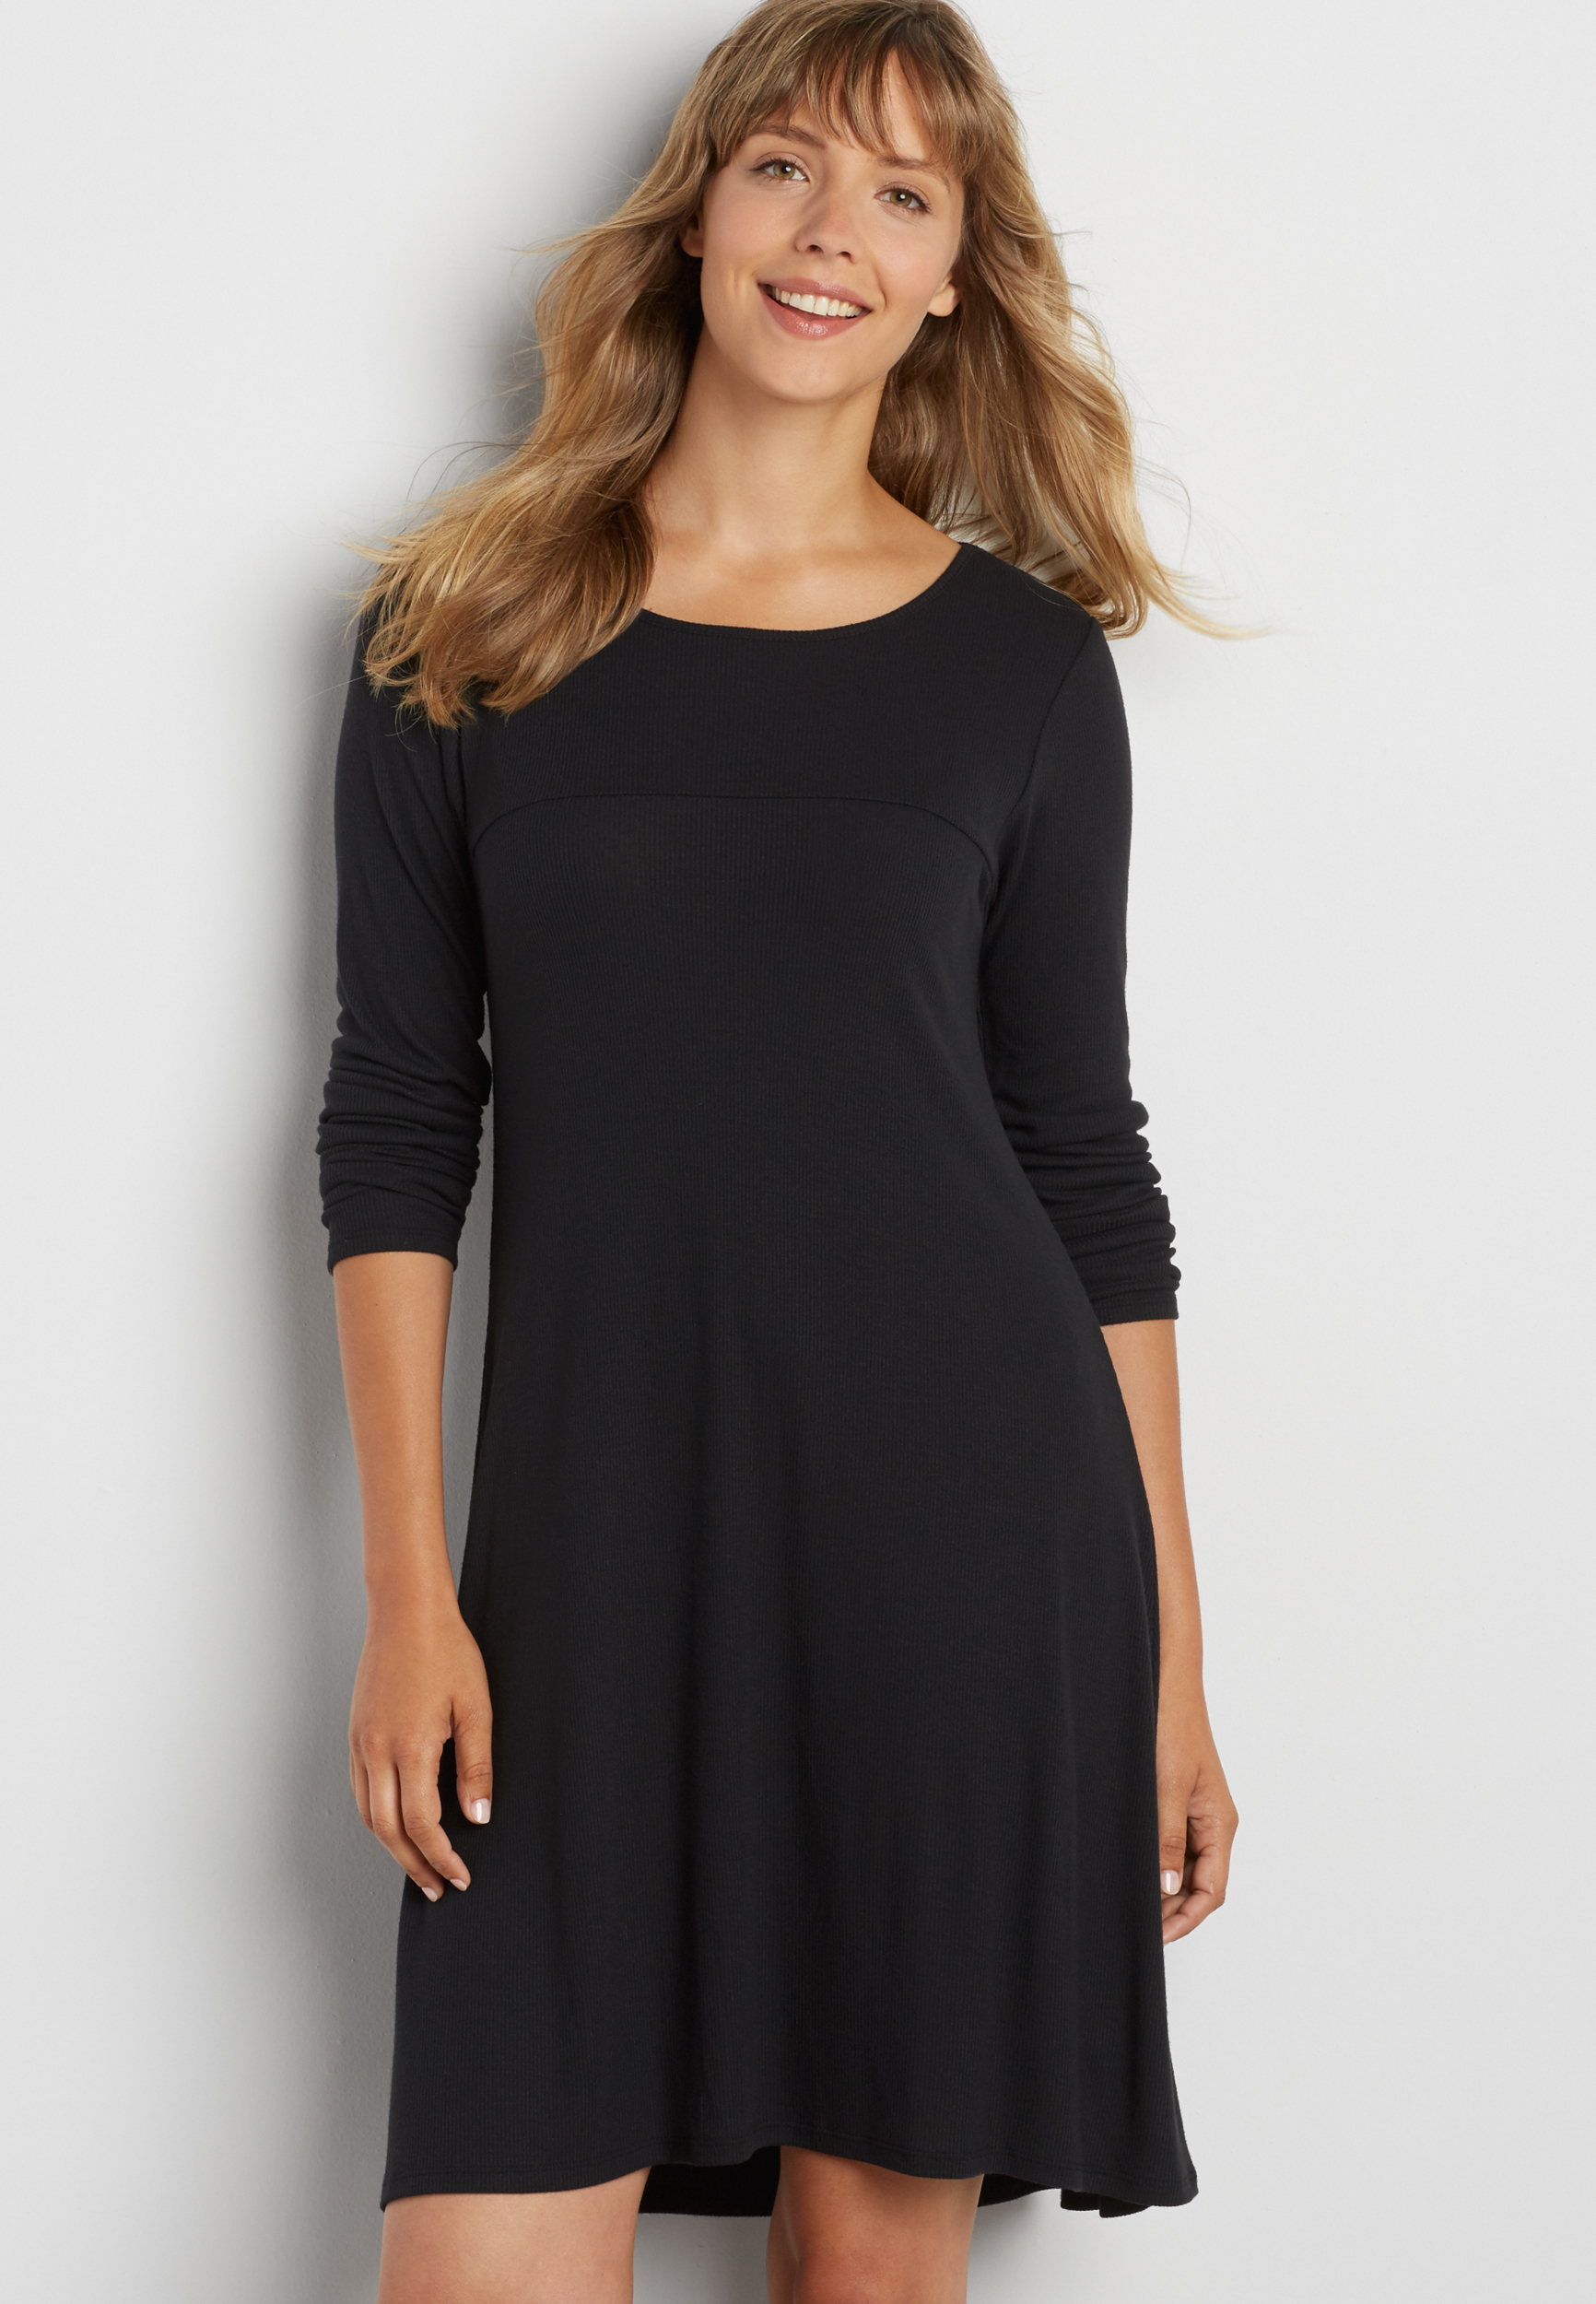 ribbed dress with long sleeves | maurices